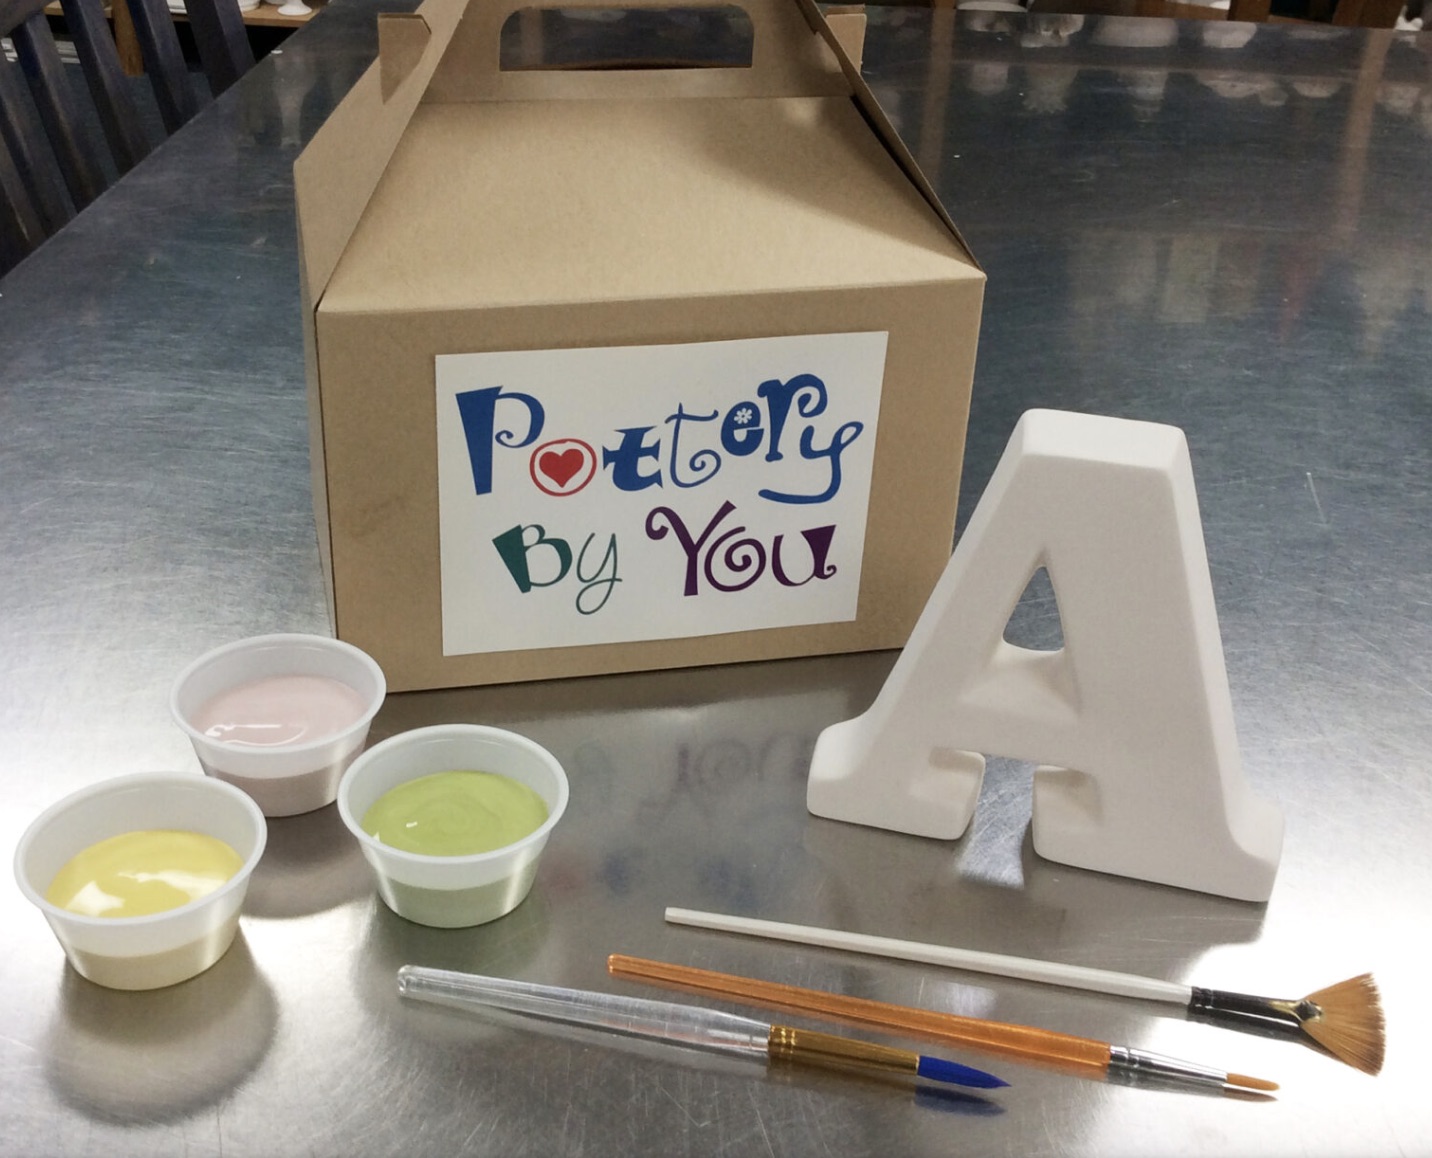 A Pottery by You Mother's Day painting kit